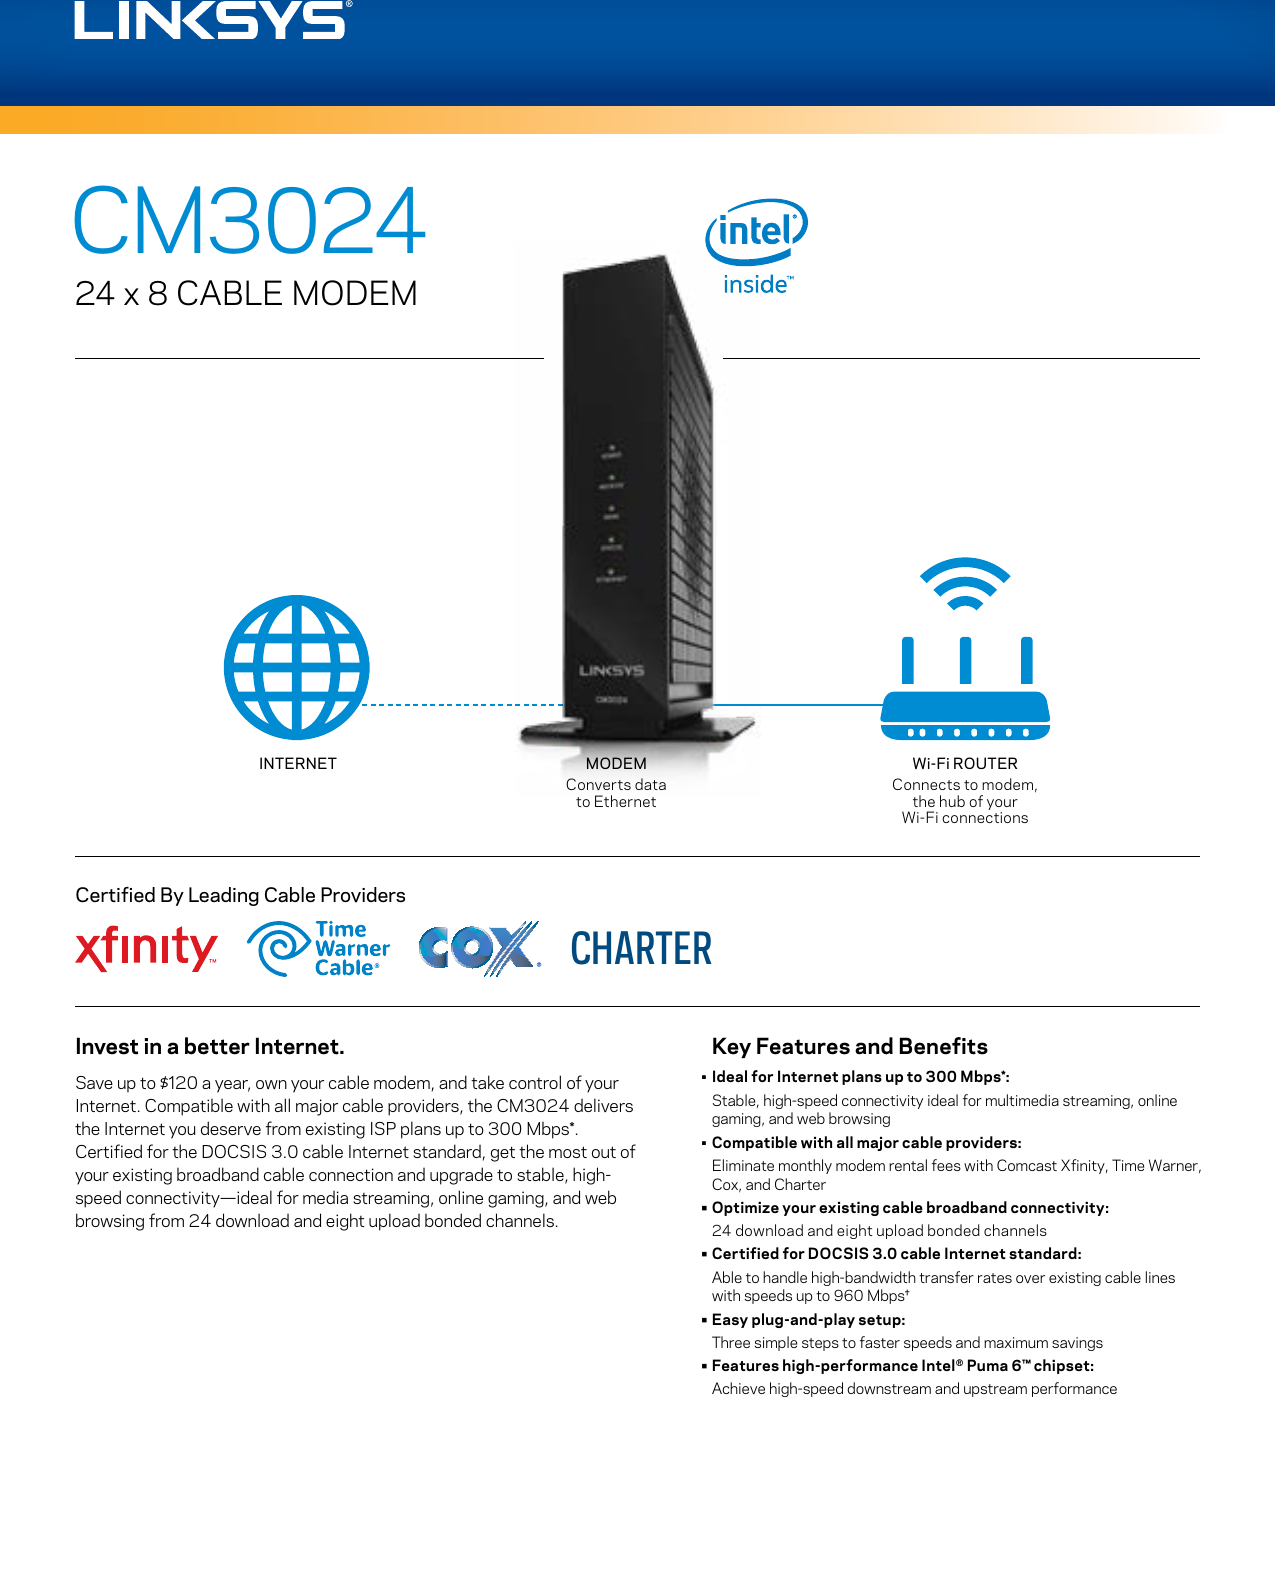 Page 1 of 3 - Datasheet - Linksys CM3024 24x8 Cable Modem  DS DOCSIS 3.0 LNKPG-00328 Rev. A00